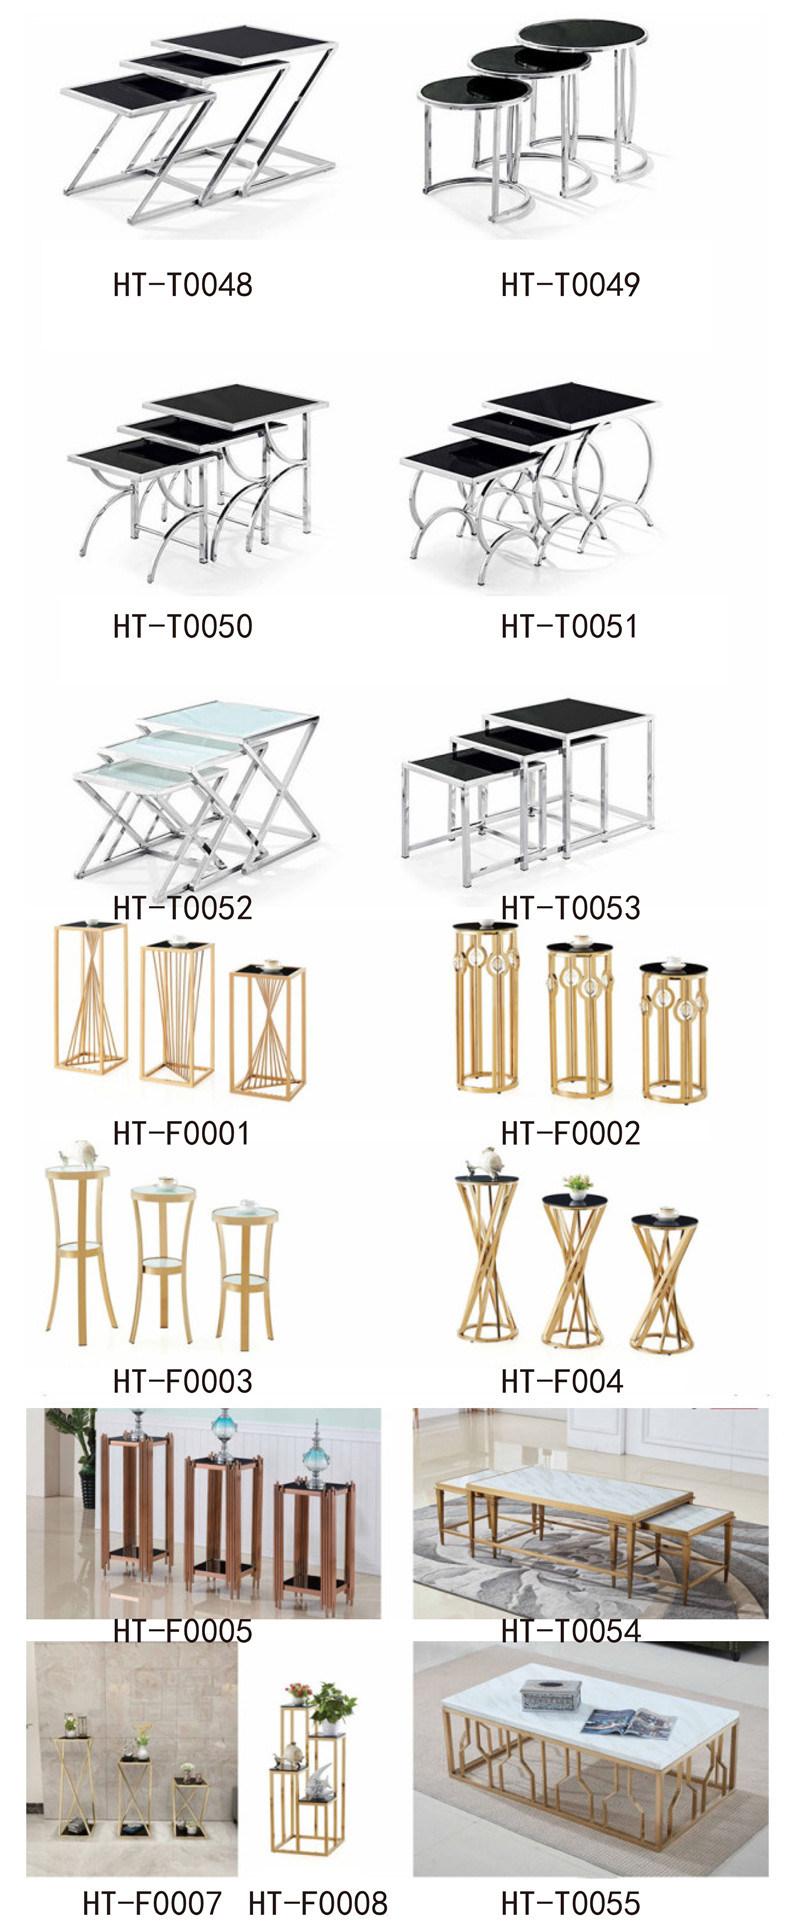 Living Room Furniture Cheap Event Wedding Table Hotel Stainless Steel Banquet Chair Table Set